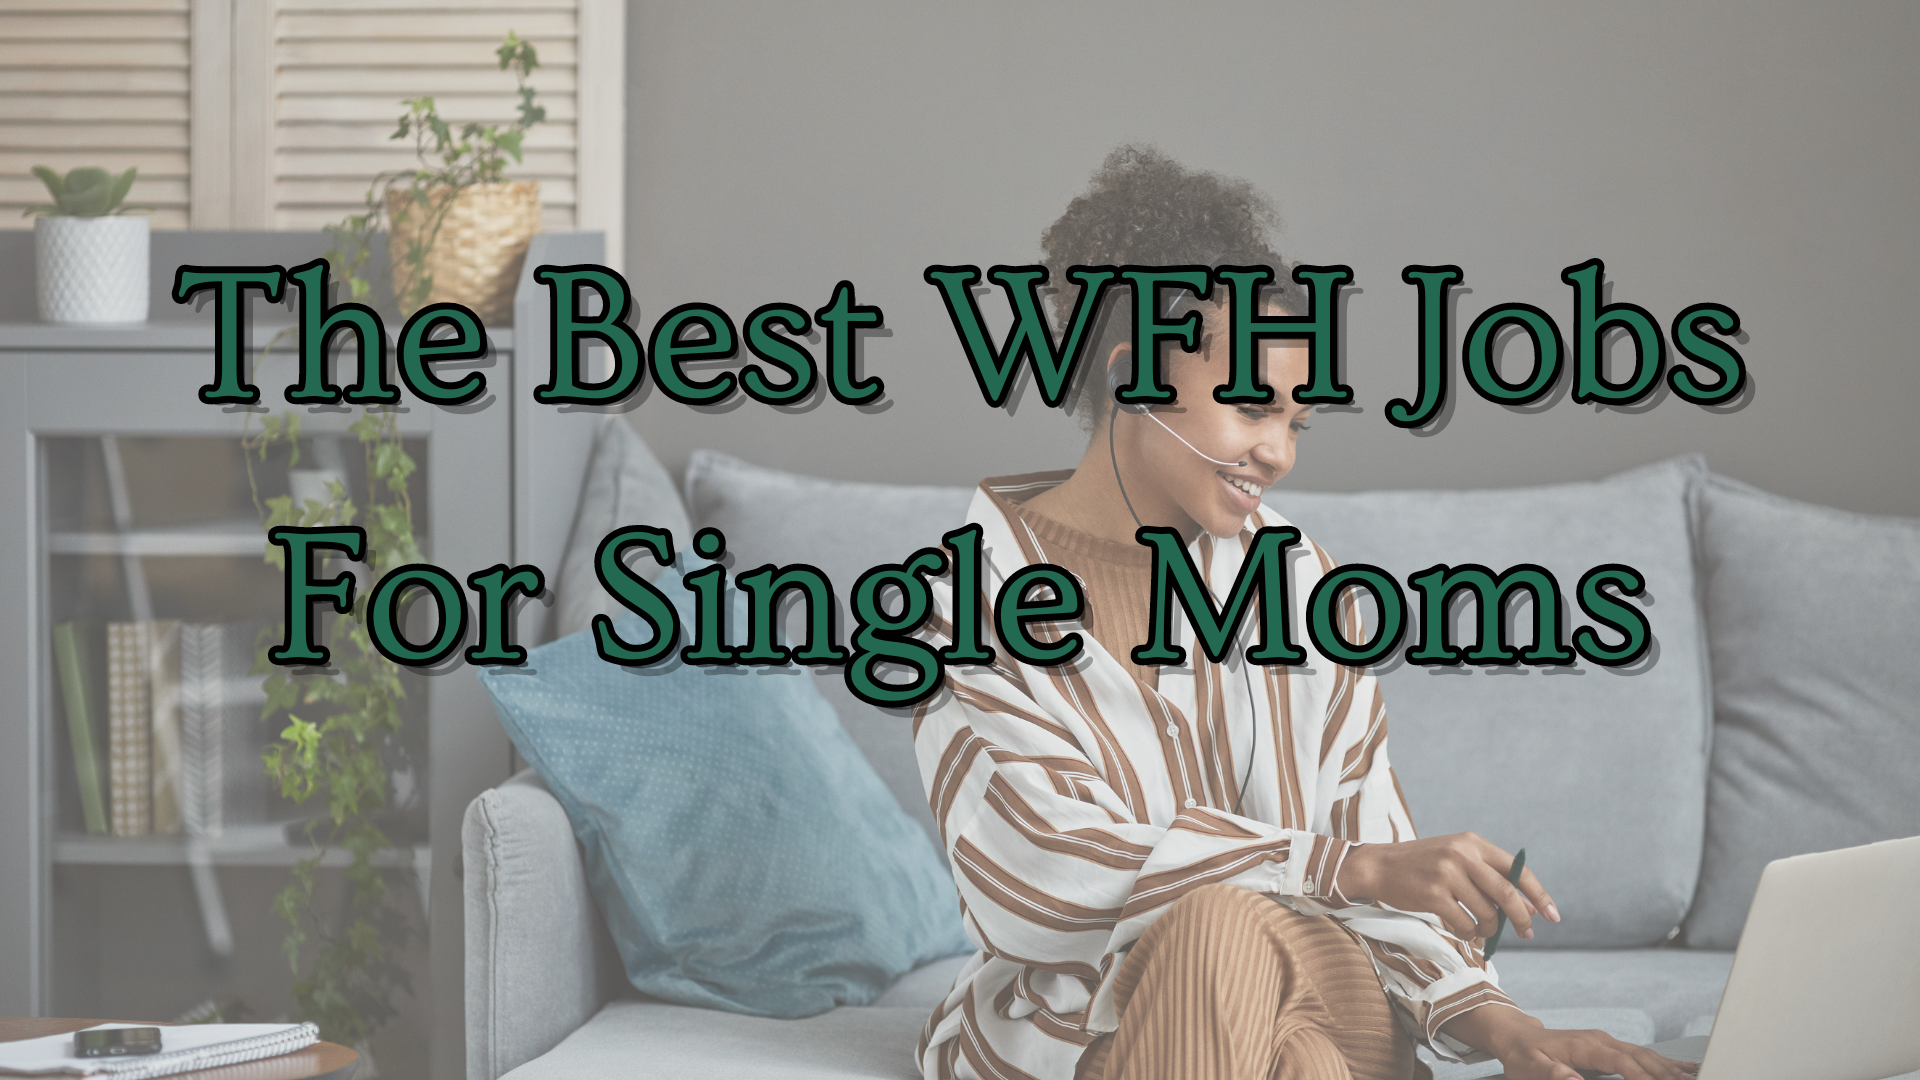 21 Remote Jobs For Single Moms To Boost Work/Life Balance